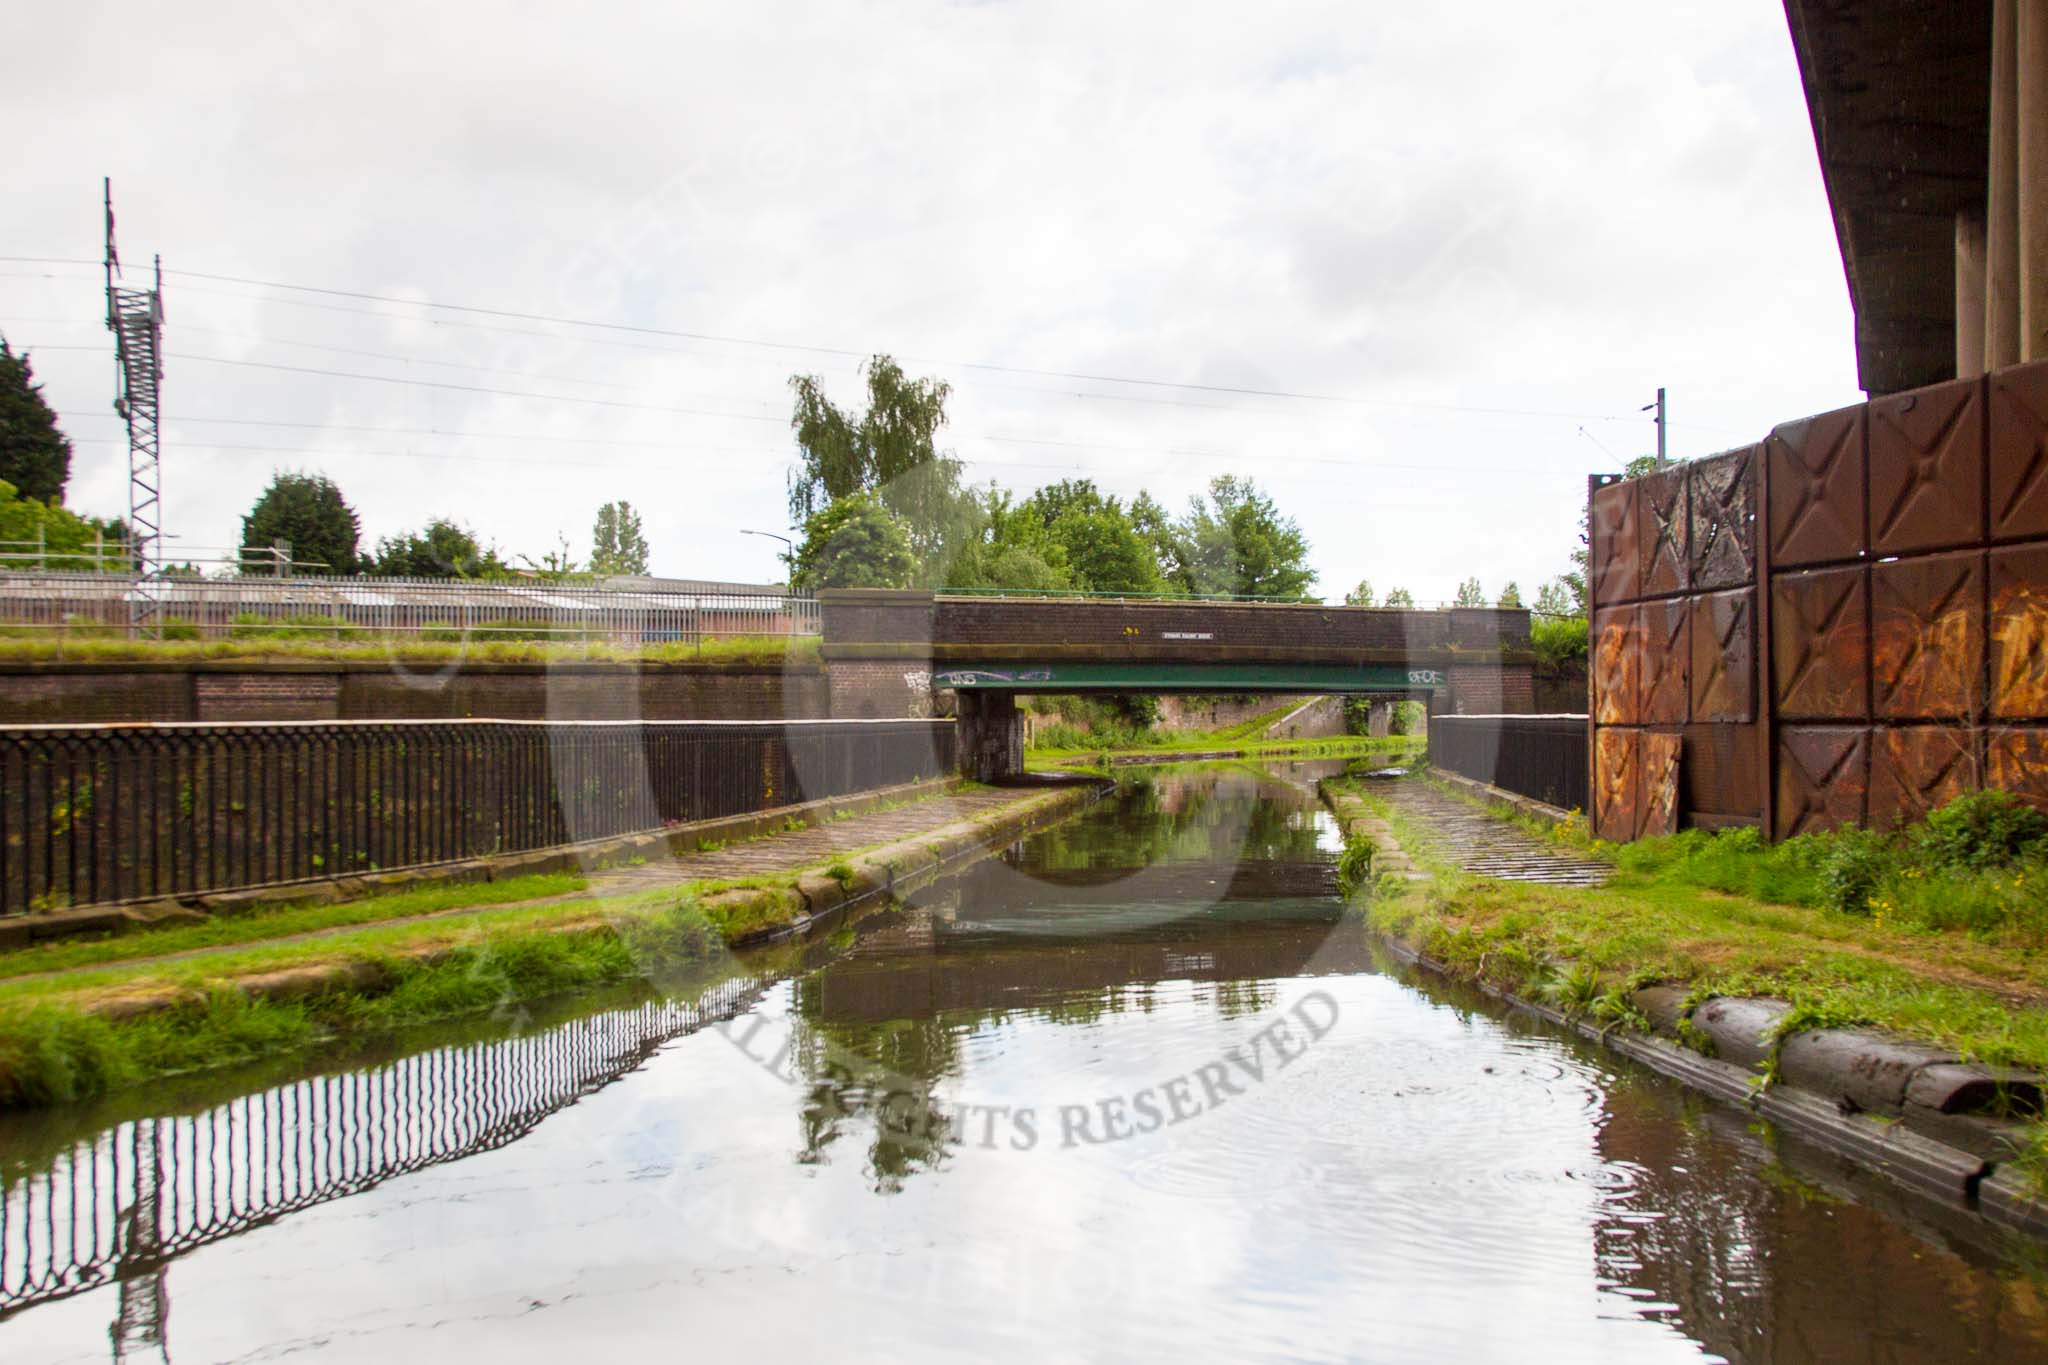 BCN Marathon Challenge 2014: The Old Main Line passes the New Main Line at the Stewart Aqueduct before passing under the railway bridge.
Birmingham Canal Navigation,


United Kingdom,
on 24 May 2014 at 18:09, image #175